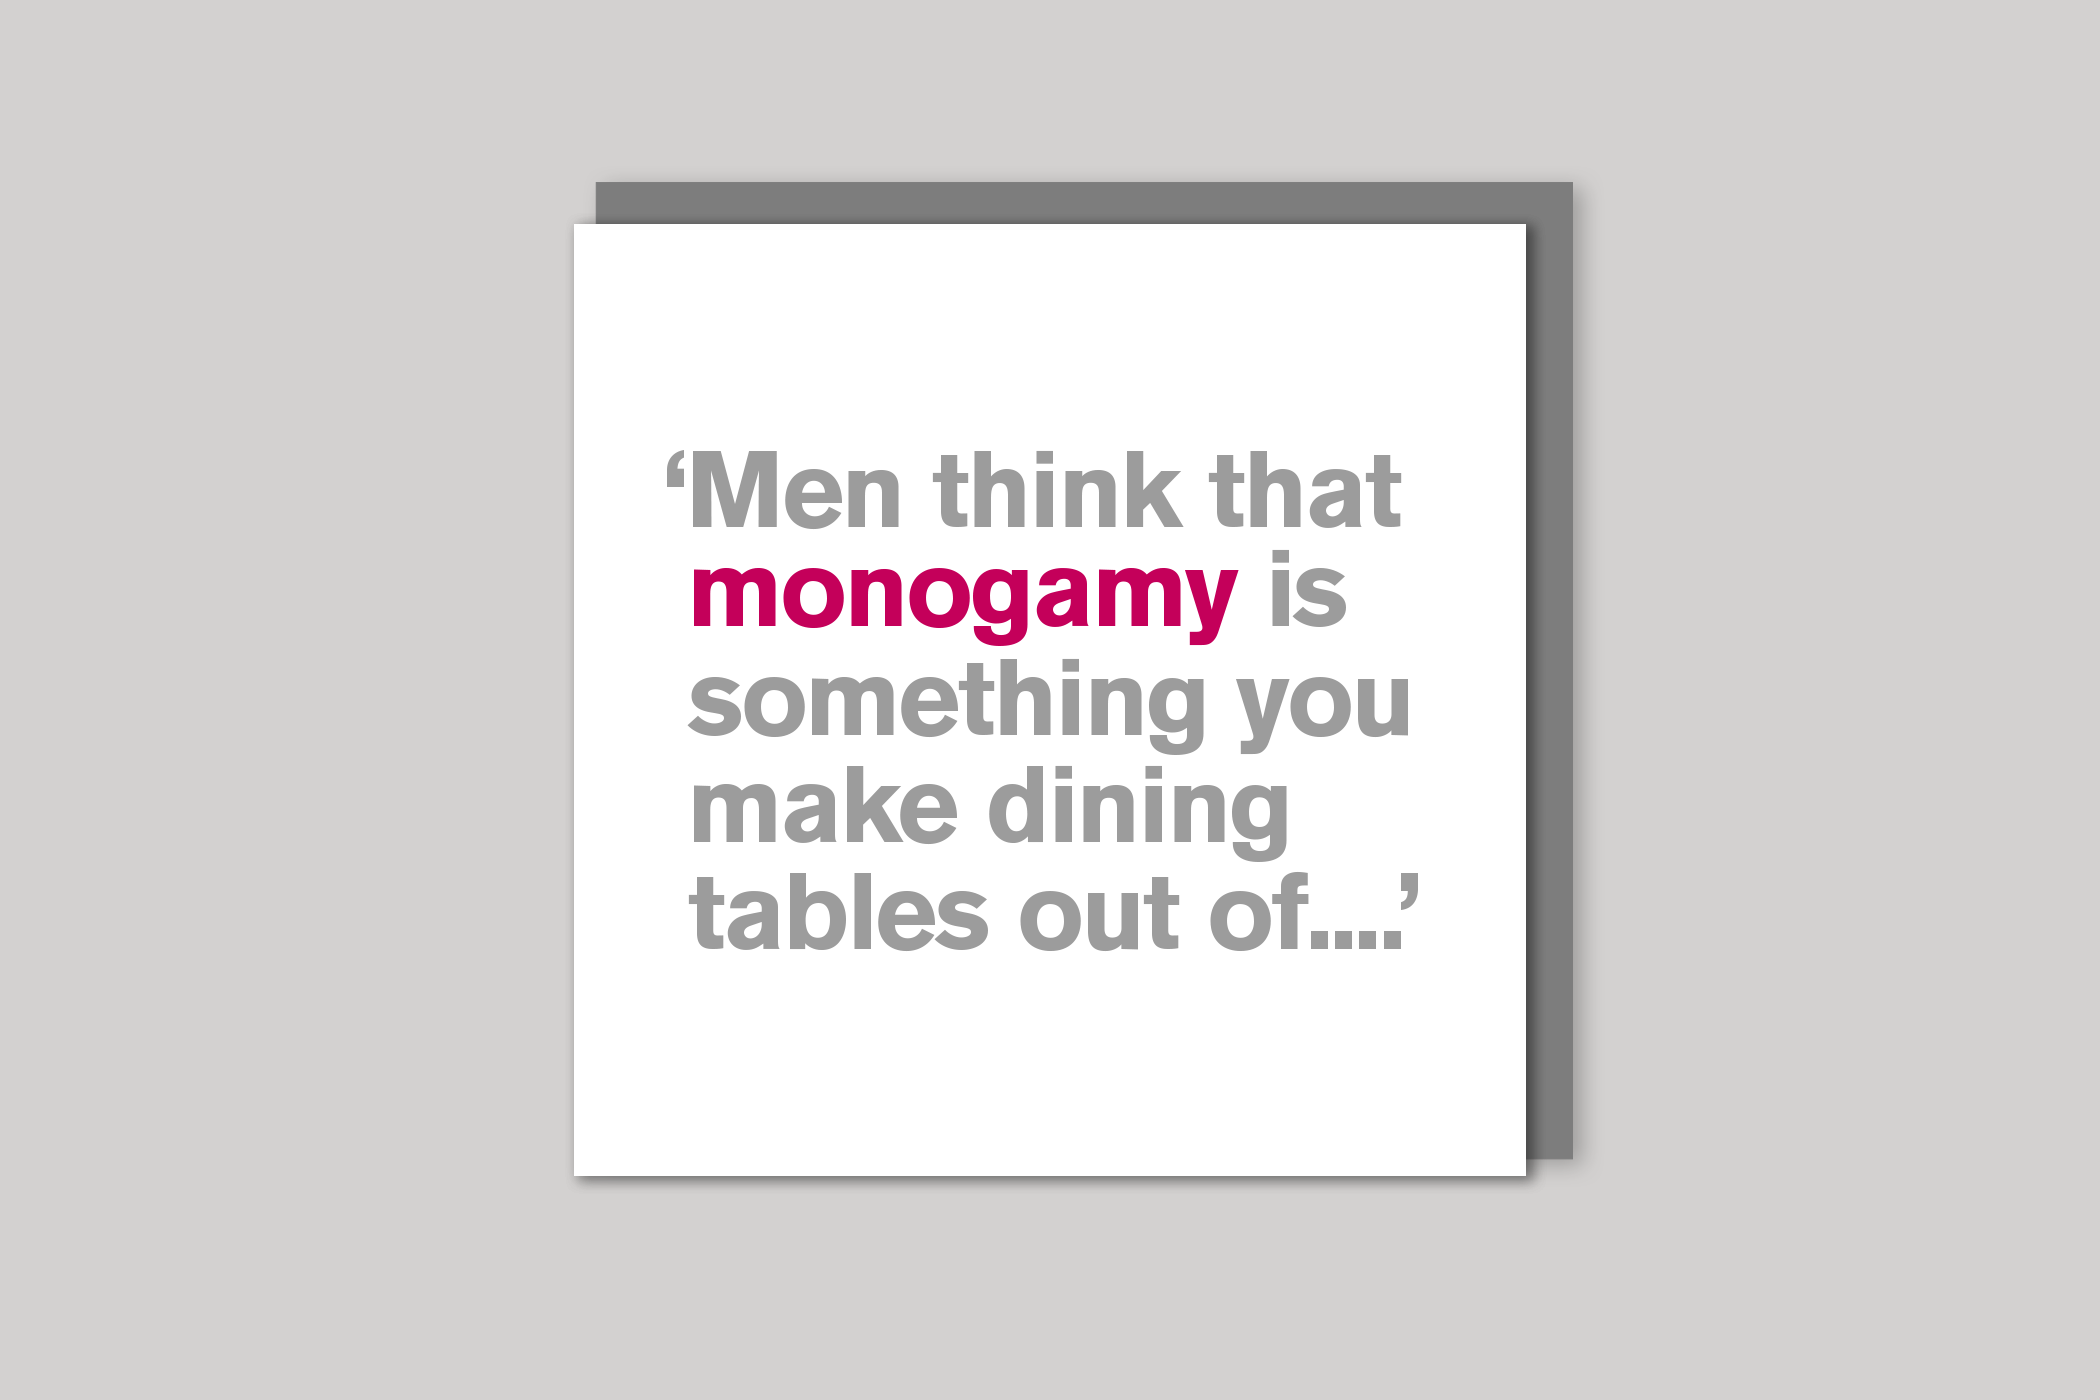 Monogamy from Lyric range of quotation cards by Icon, back page.